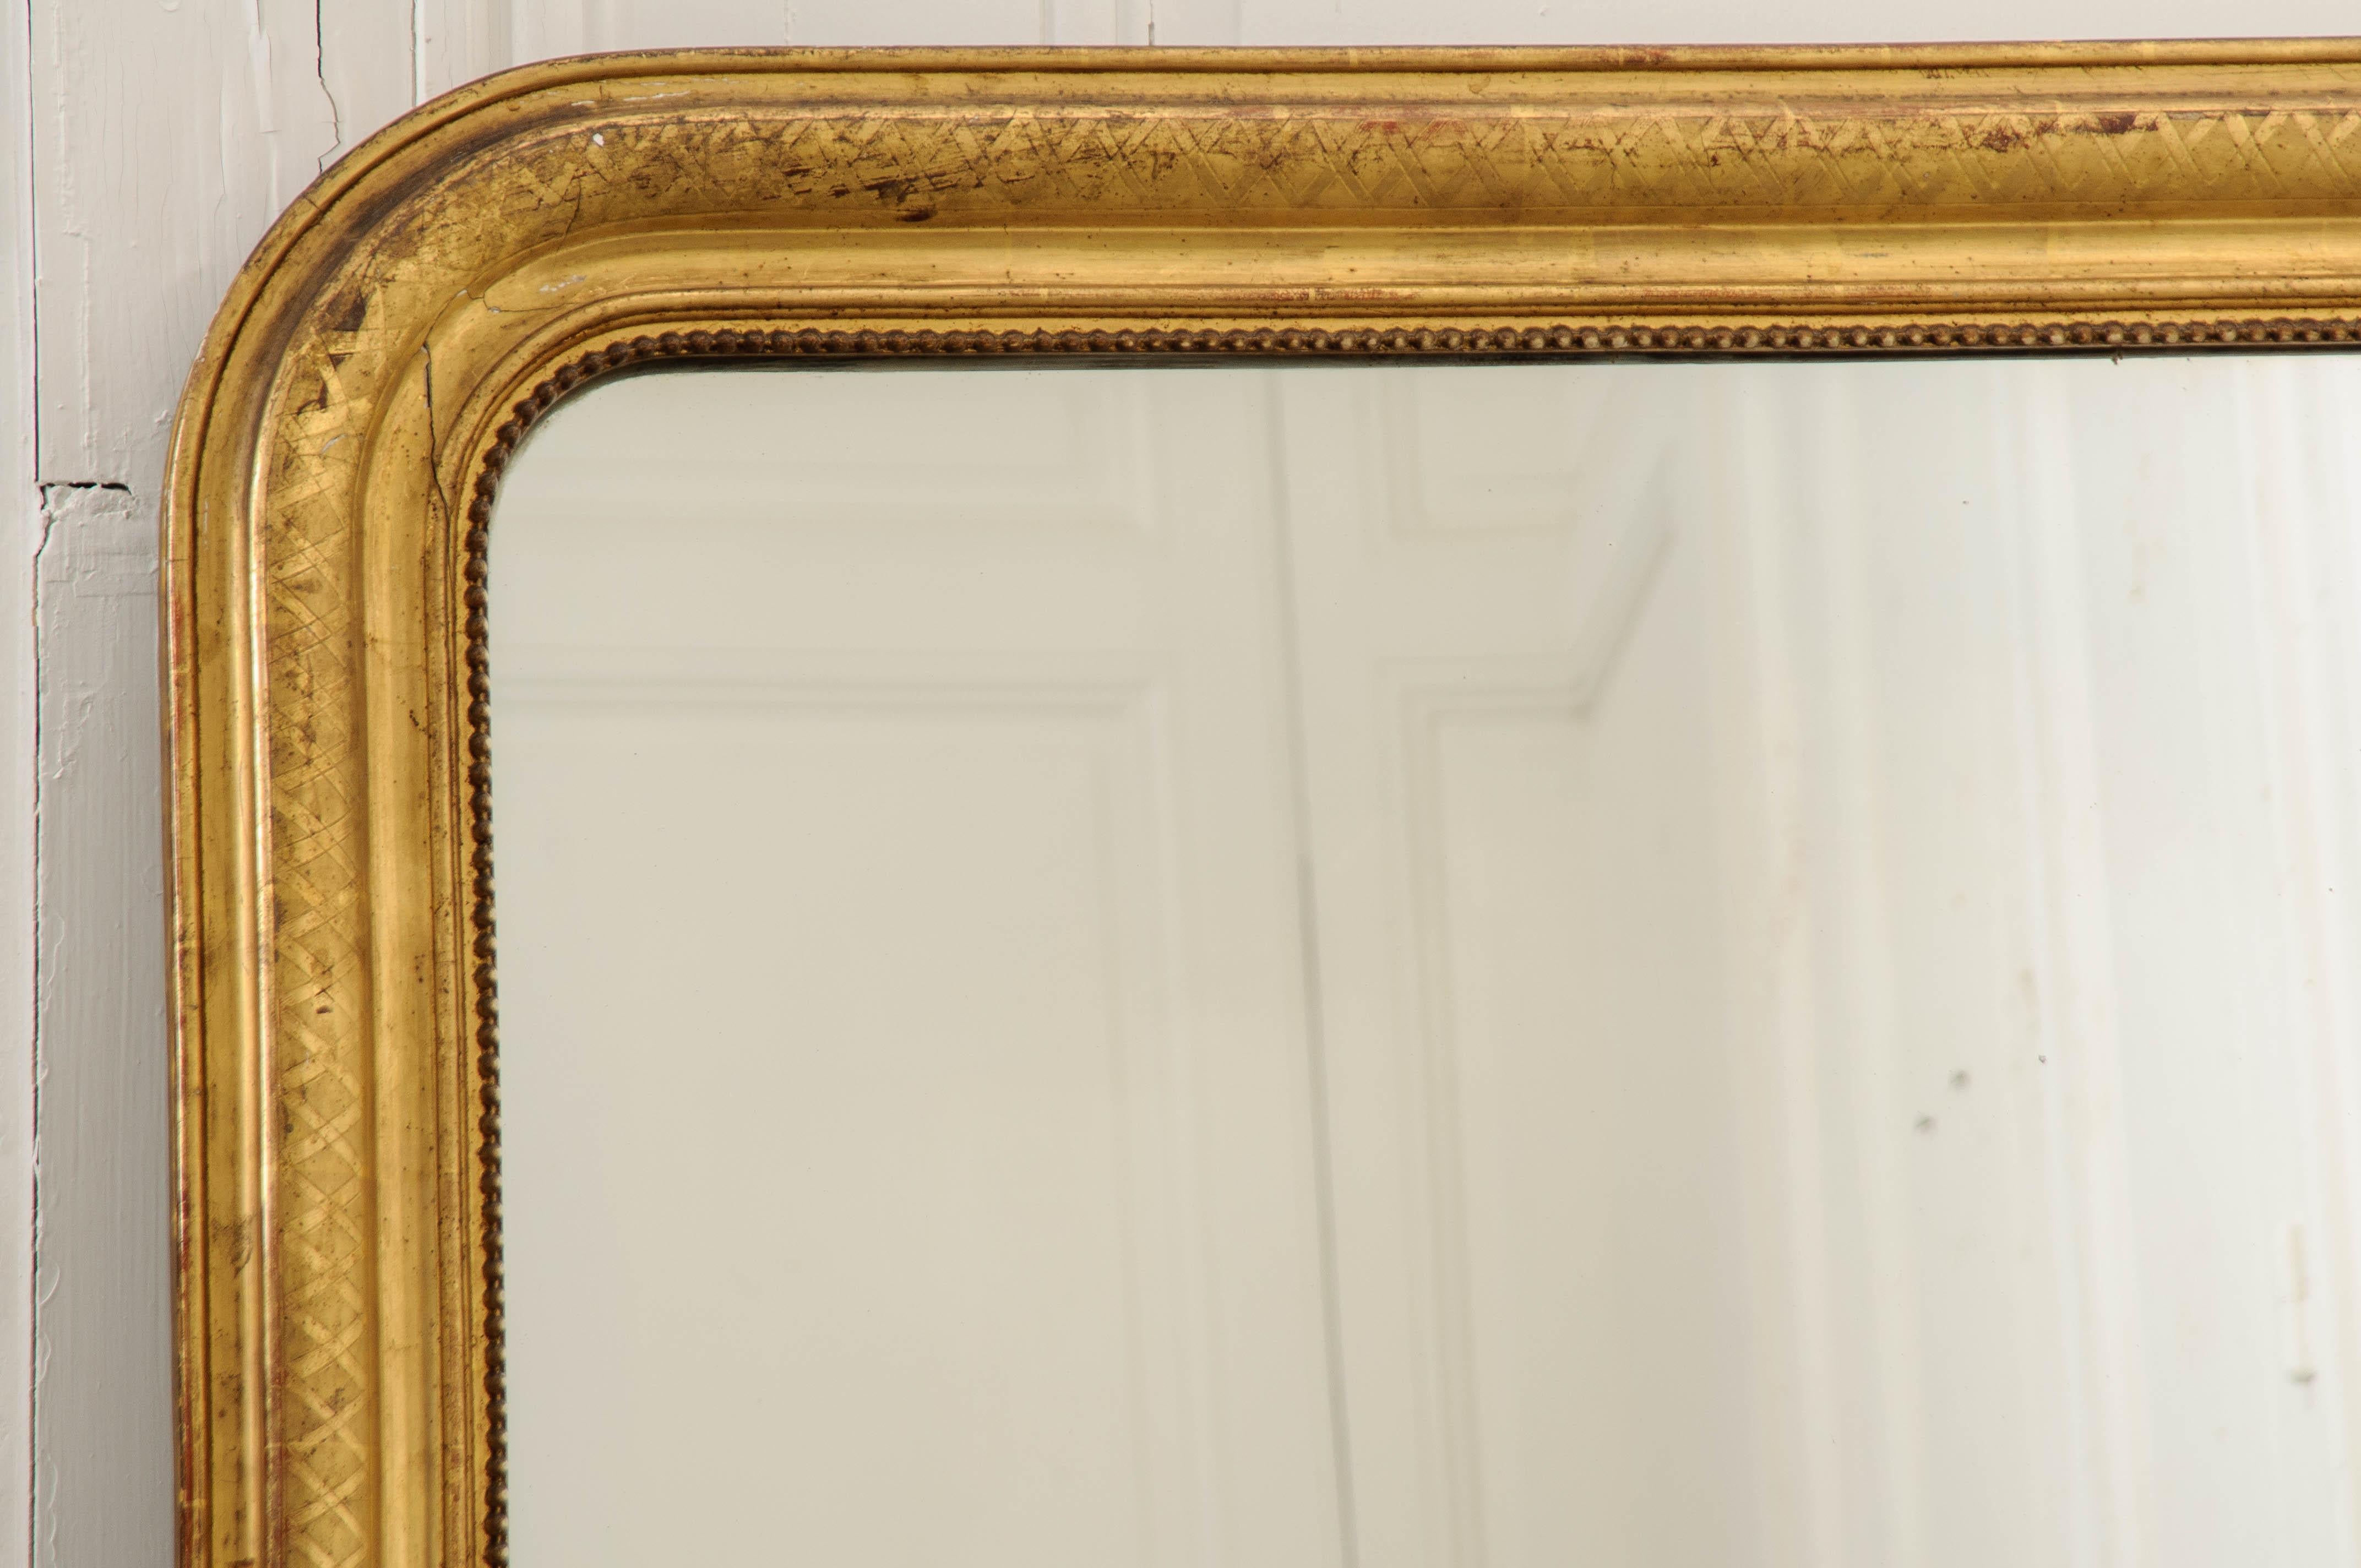 A fabulous gold gilt Louis Philippe mirror, with its iconic shaped frame. This 19th century French antique piece has remarkably intact gold gilt that is brilliant and lustrous. It has been finished with an etched cross-hatch design that provides